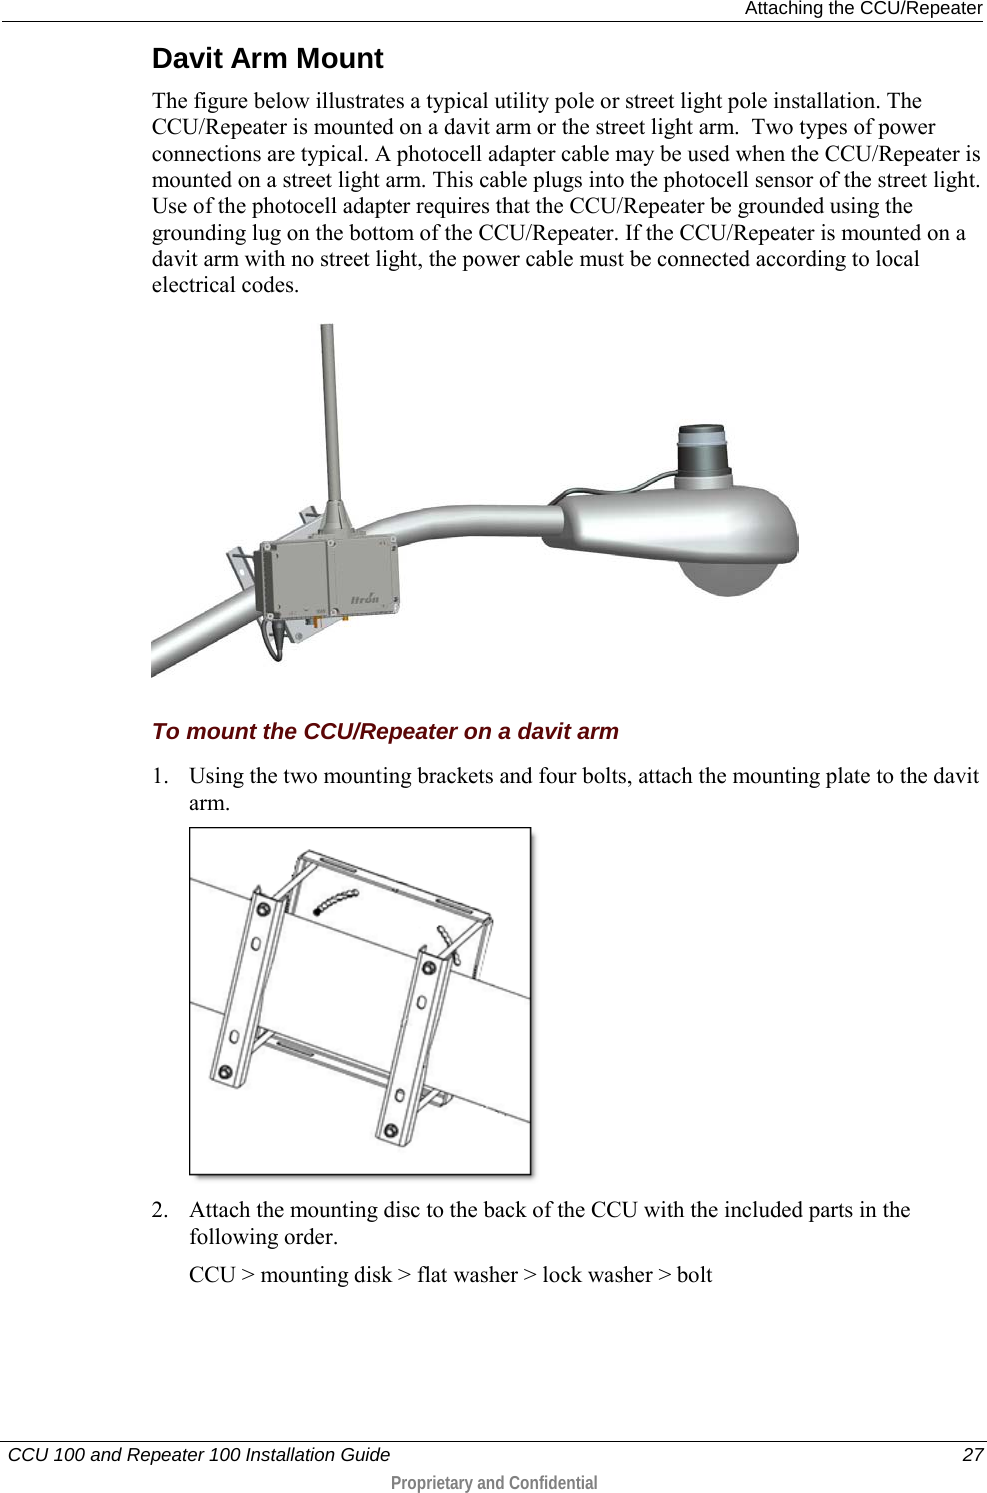  Attaching the CCU/Repeater   CCU 100 and Repeater 100 Installation Guide    27  Proprietary and Confidential  Davit Arm Mount The figure below illustrates a typical utility pole or street light pole installation. The CCU/Repeater is mounted on a davit arm or the street light arm.  Two types of power connections are typical. A photocell adapter cable may be used when the CCU/Repeater is mounted on a street light arm. This cable plugs into the photocell sensor of the street light. Use of the photocell adapter requires that the CCU/Repeater be grounded using the grounding lug on the bottom of the CCU/Repeater. If the CCU/Repeater is mounted on a davit arm with no street light, the power cable must be connected according to local electrical codes.     To mount the CCU/Repeater on a davit arm 1. Using the two mounting brackets and four bolts, attach the mounting plate to the davit arm.  2. Attach the mounting disc to the back of the CCU with the included parts in the following order. CCU &gt; mounting disk &gt; flat washer &gt; lock washer &gt; bolt 